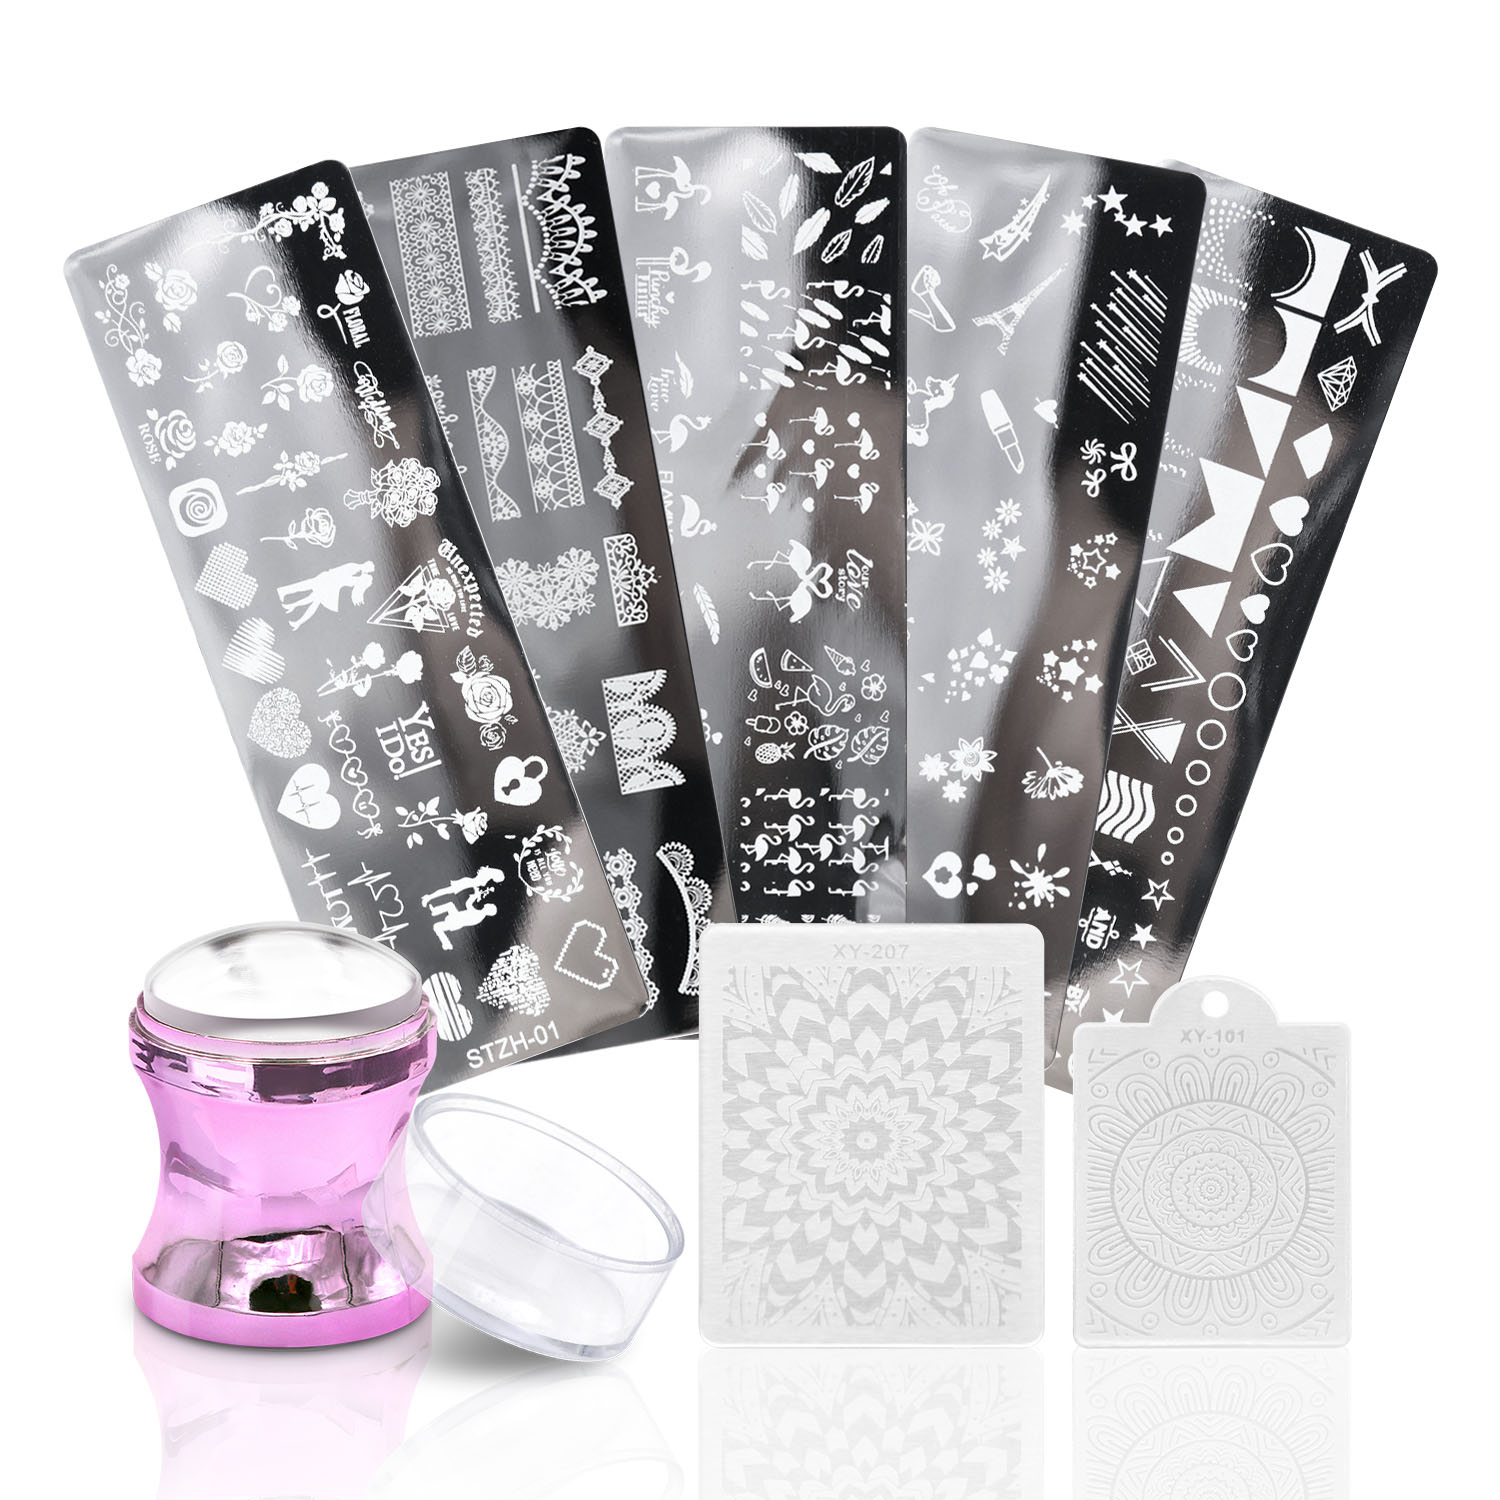 Nail Art Stamper,Pinkiou Nail Stamper Kit, Nail Stamping Plate Clear  Silicone Nail Stamper French Tip Nail Stamp With Template Scraper Nail  Plates,Stamper For Nails With 5PCS Stamping Plates - Pinkiou- A Airbrush